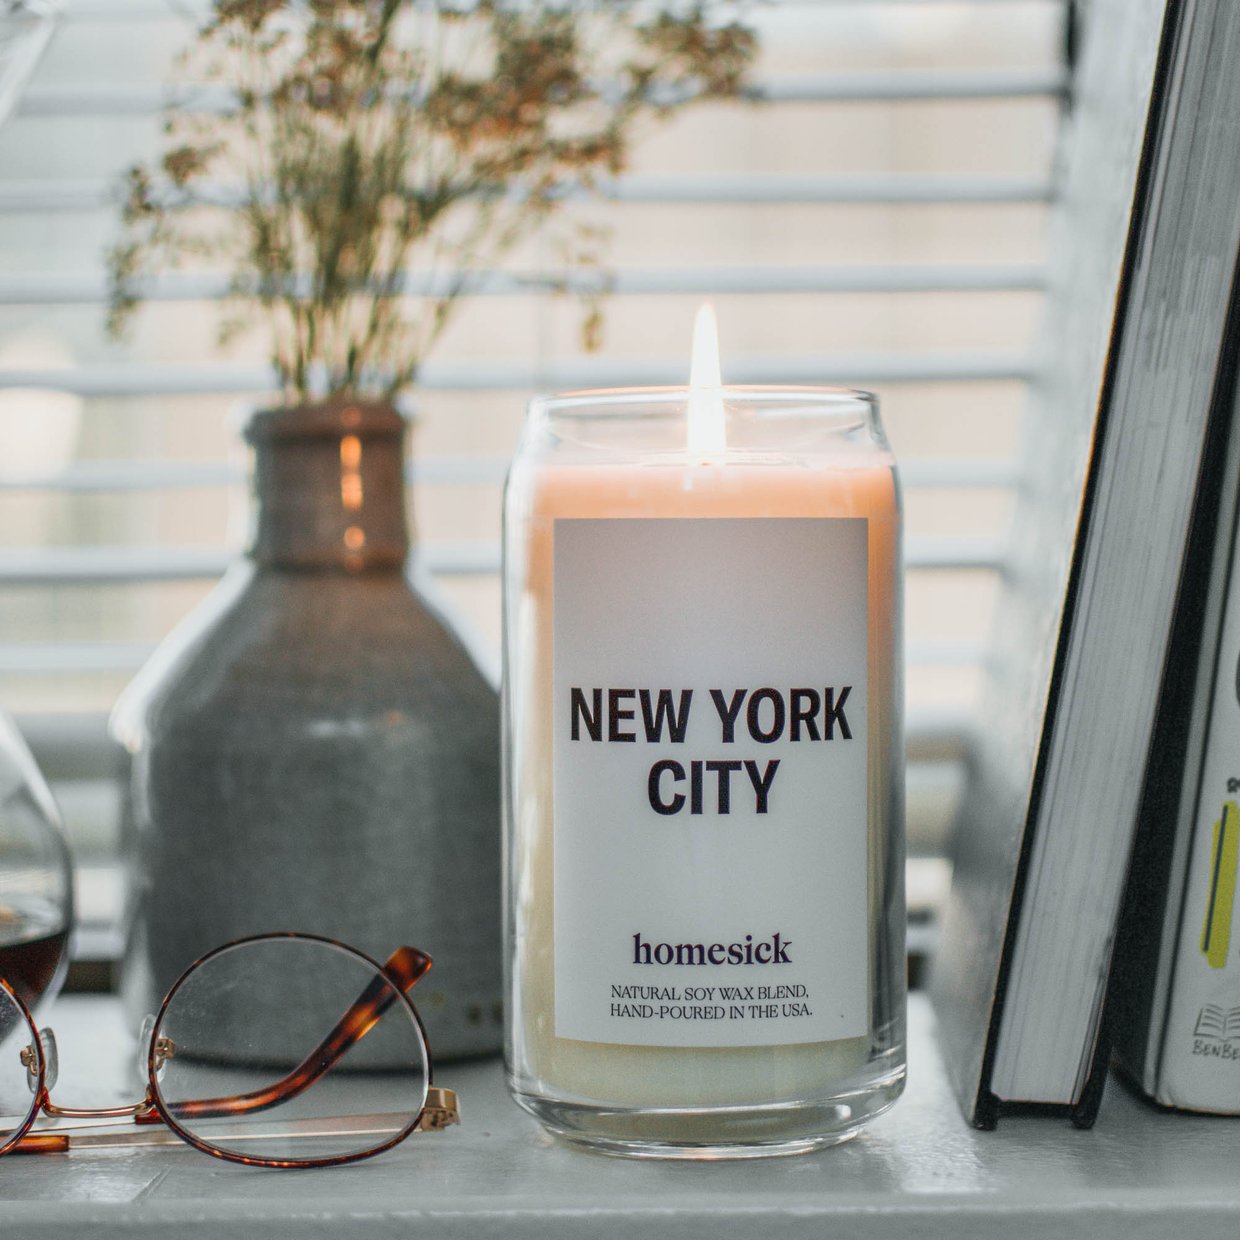 Homesick Homesick New York City Candle available at The Good Life Boutique